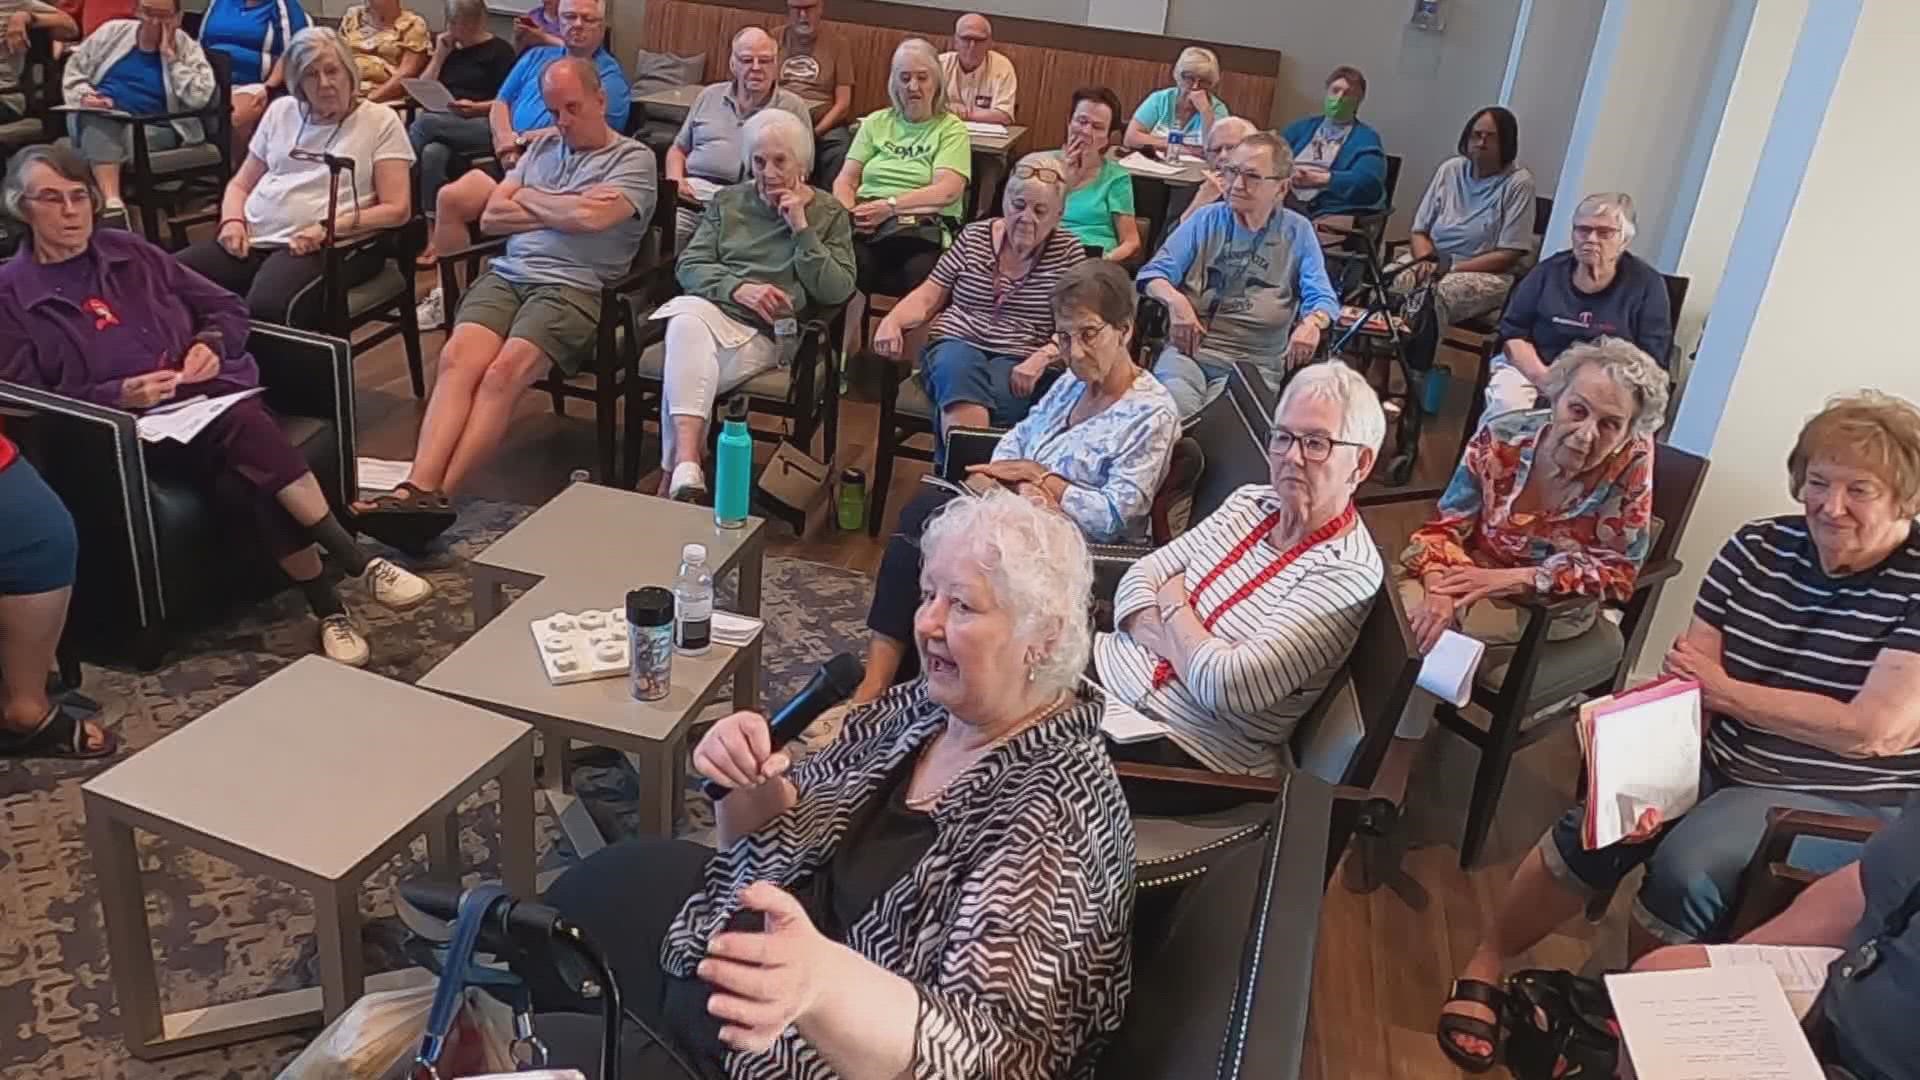 On Thursday, AARP hosted a round table discussion with the city of Knoxville about how senior adults face homelessness because of the lack of affordable housing.